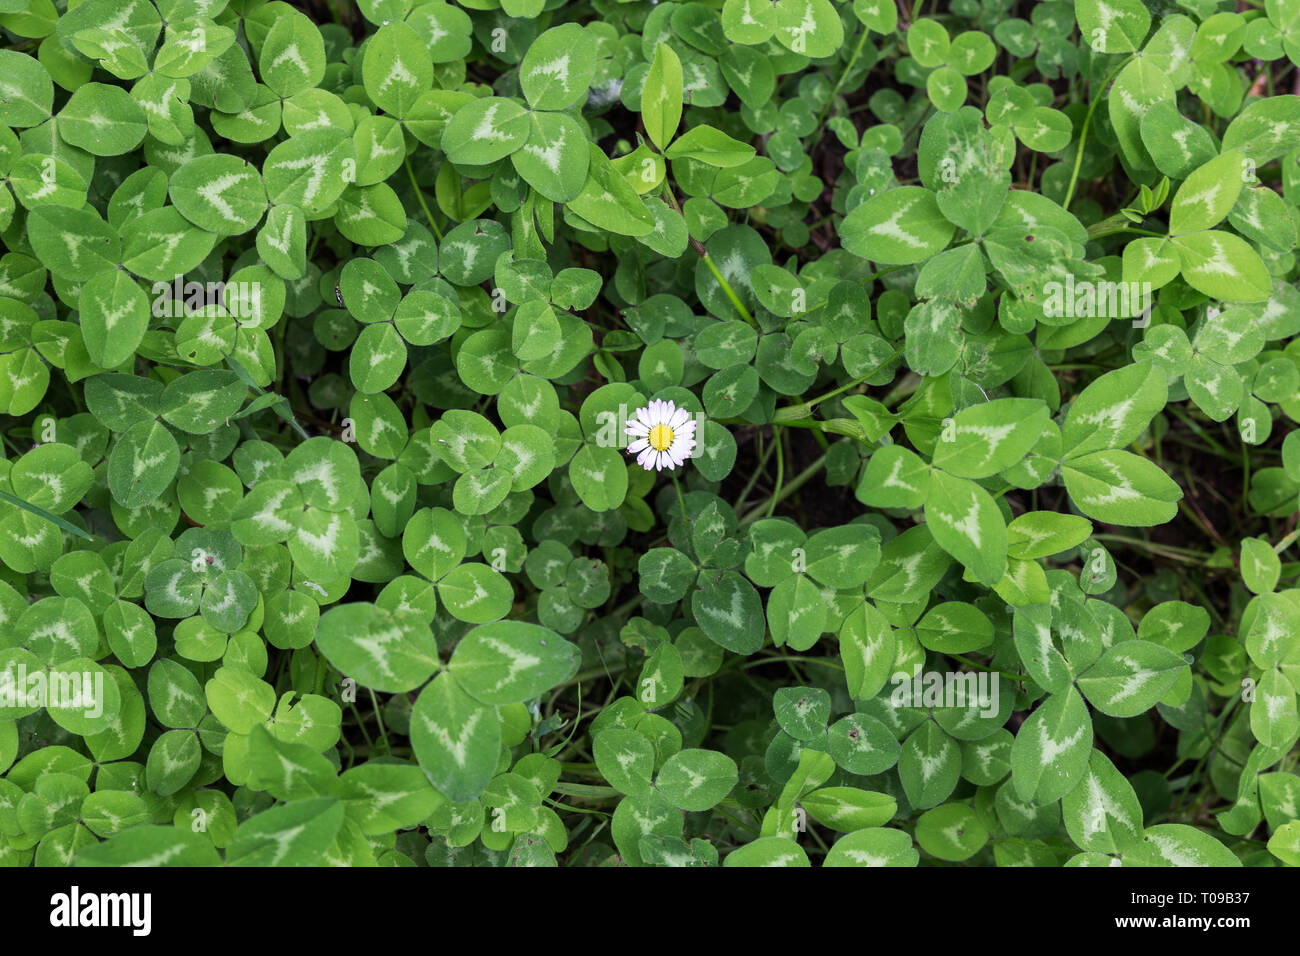 green background of clovers with a lonely daisy Stock Photo